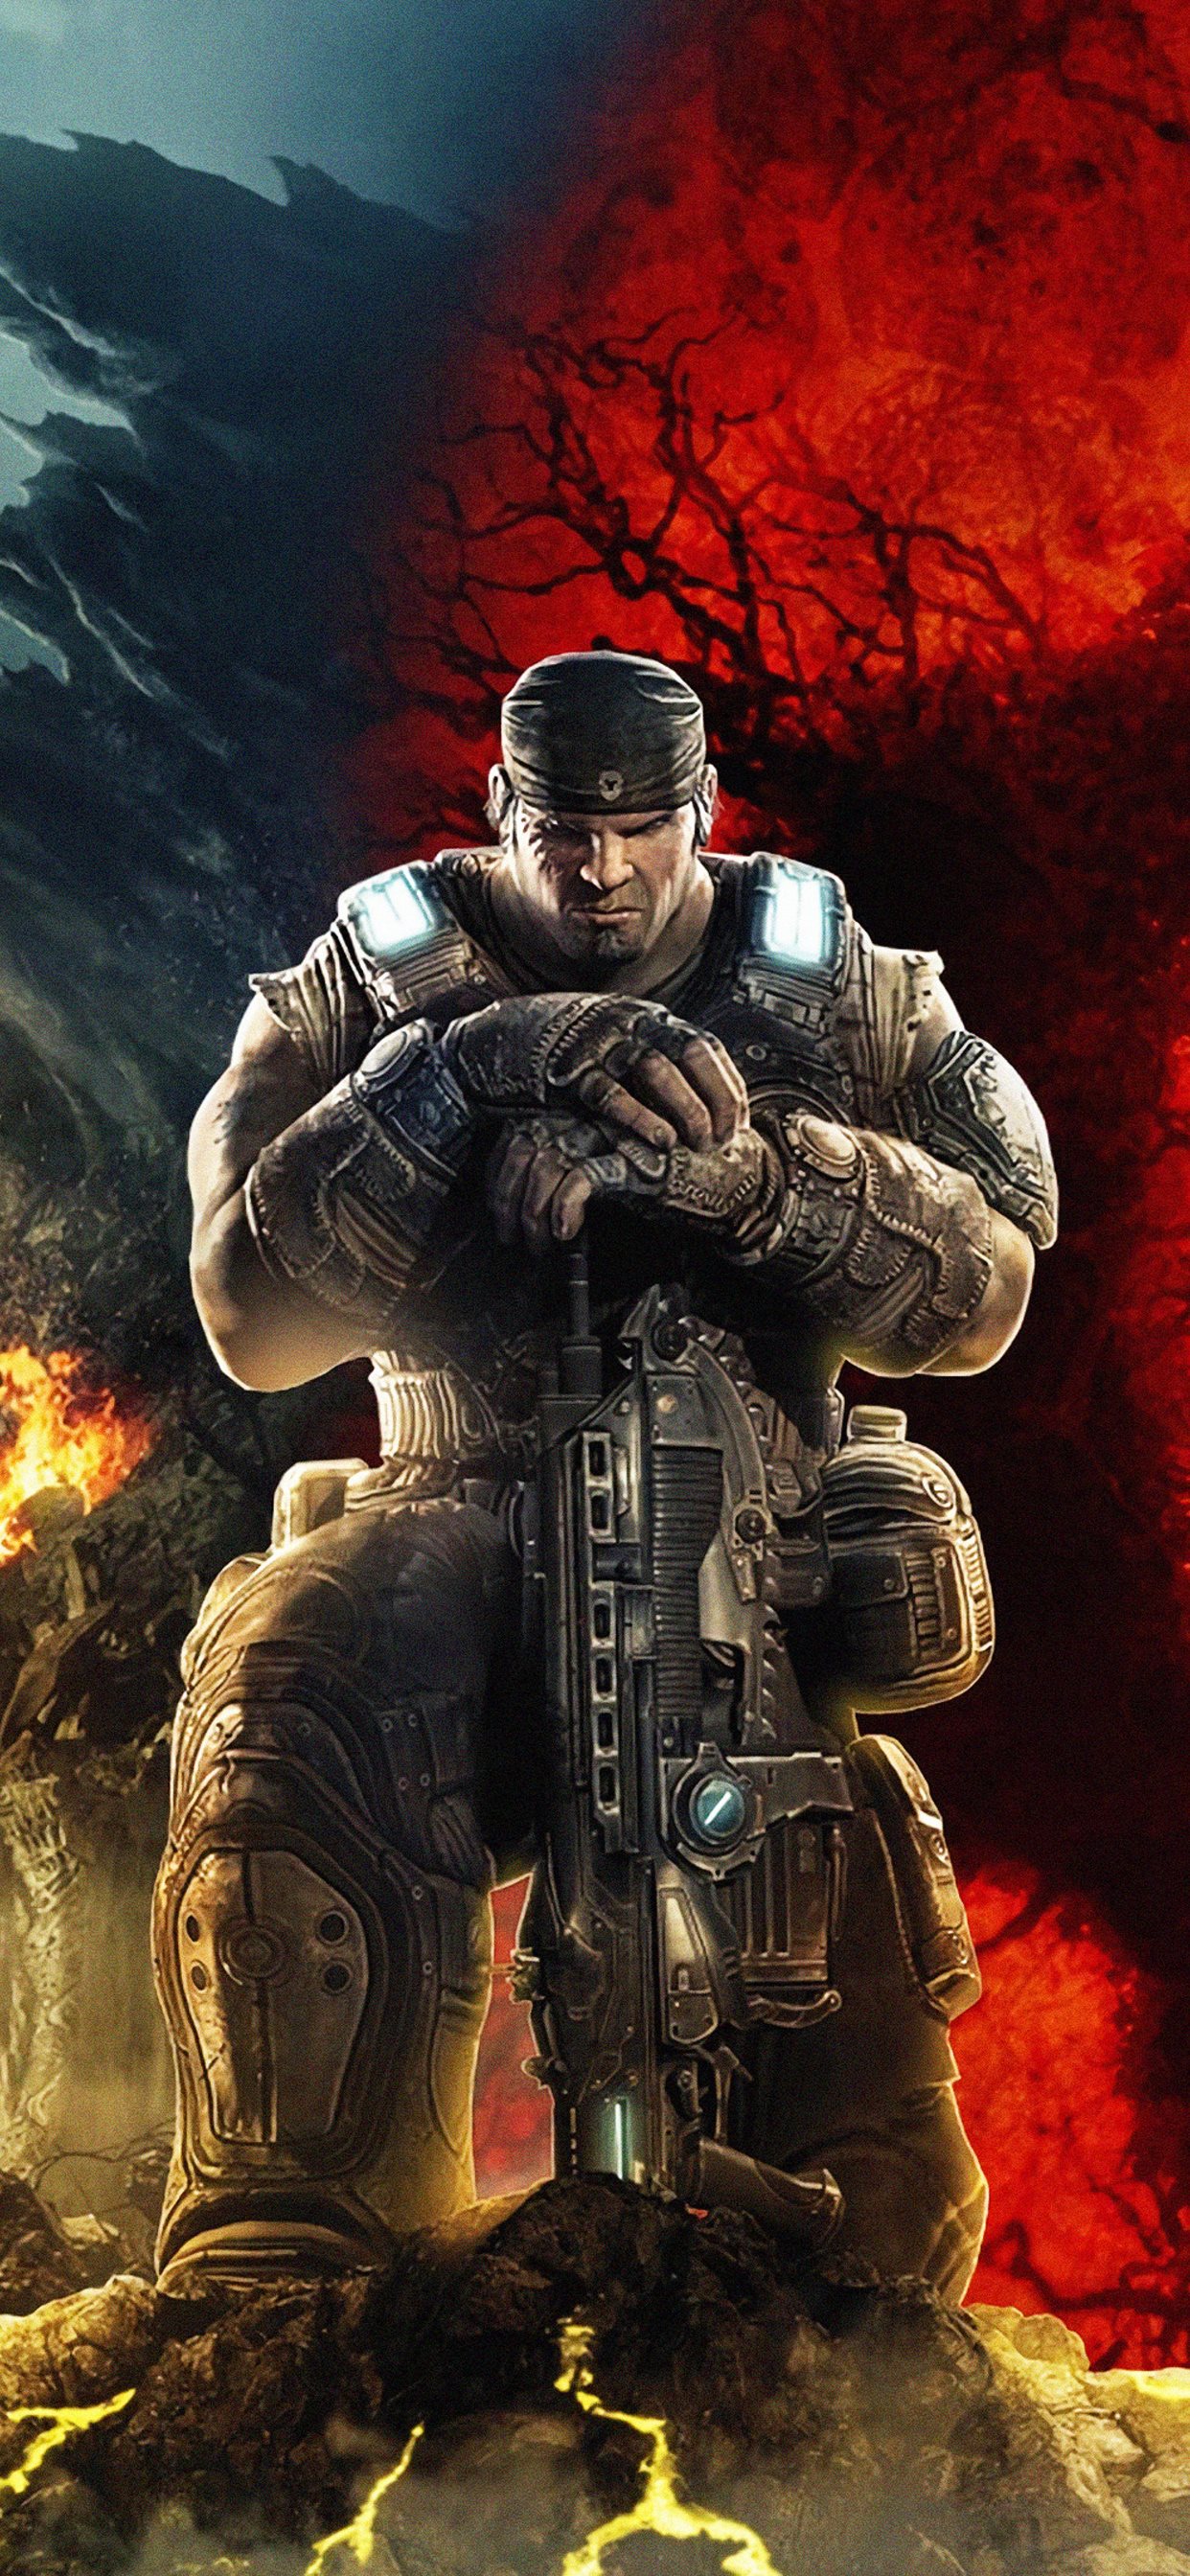 Iphone X Gears Of War 5 Backgrounds